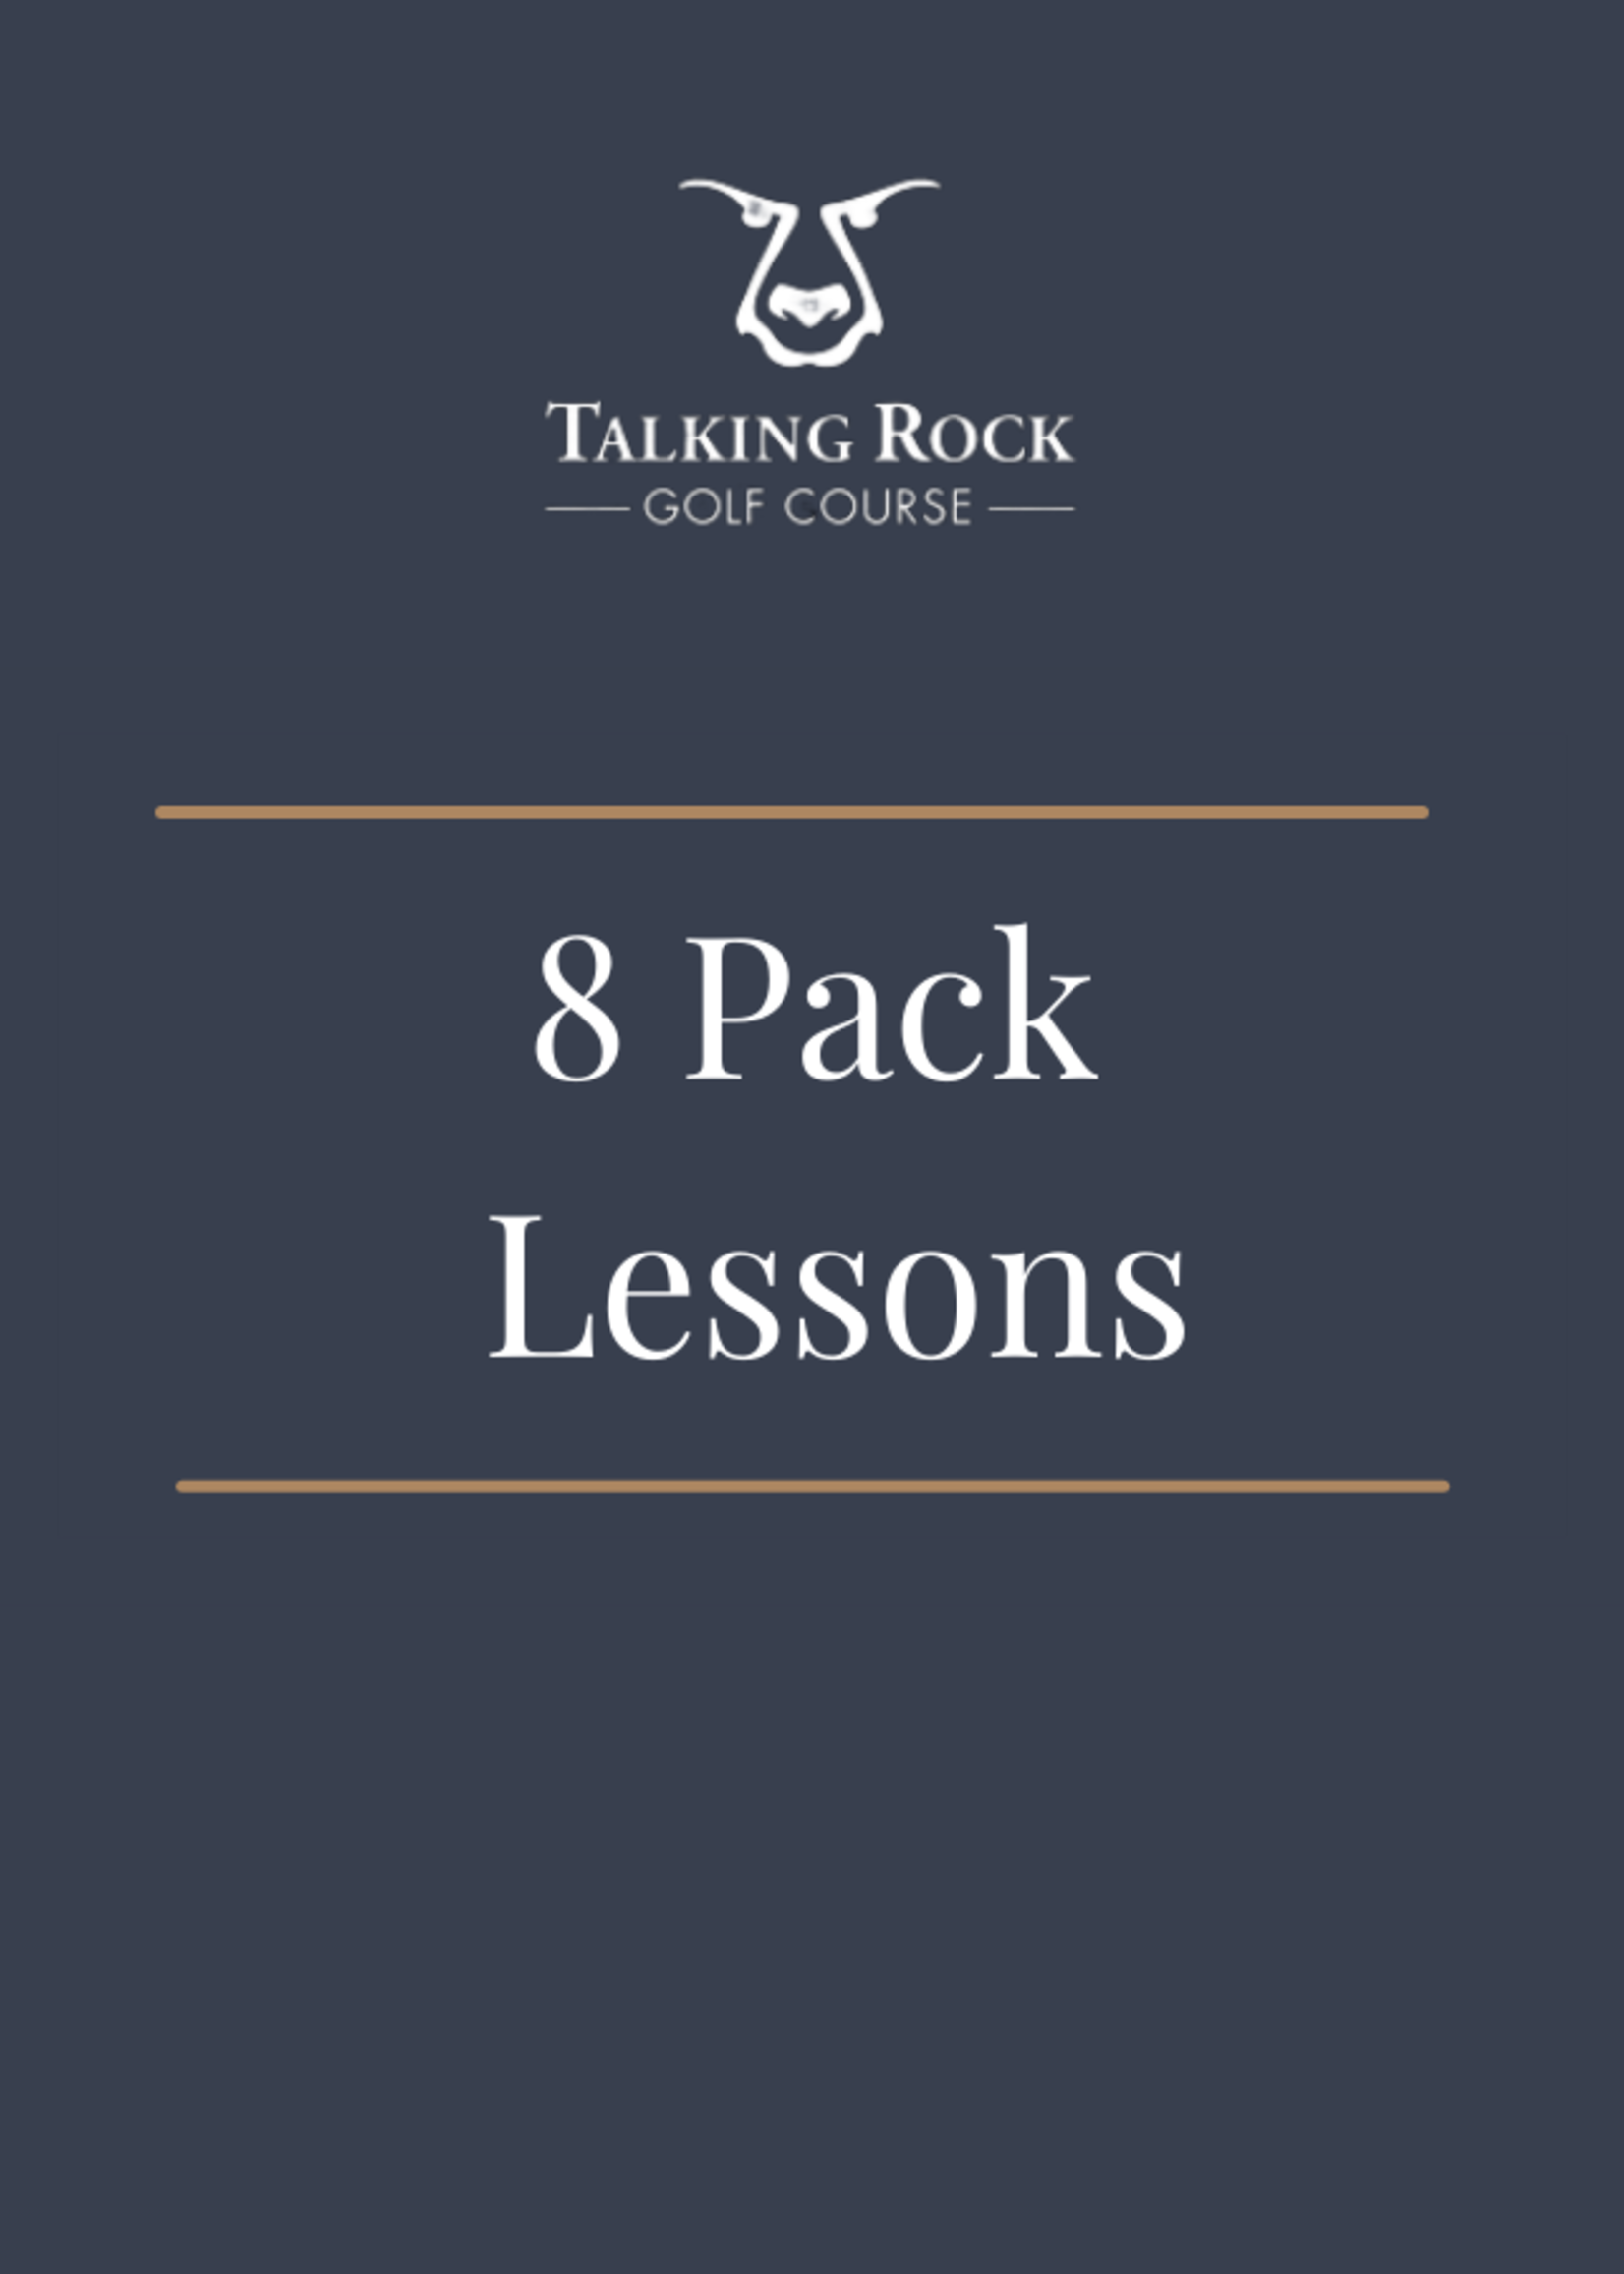 Private Lesson for Two - 8 Pack